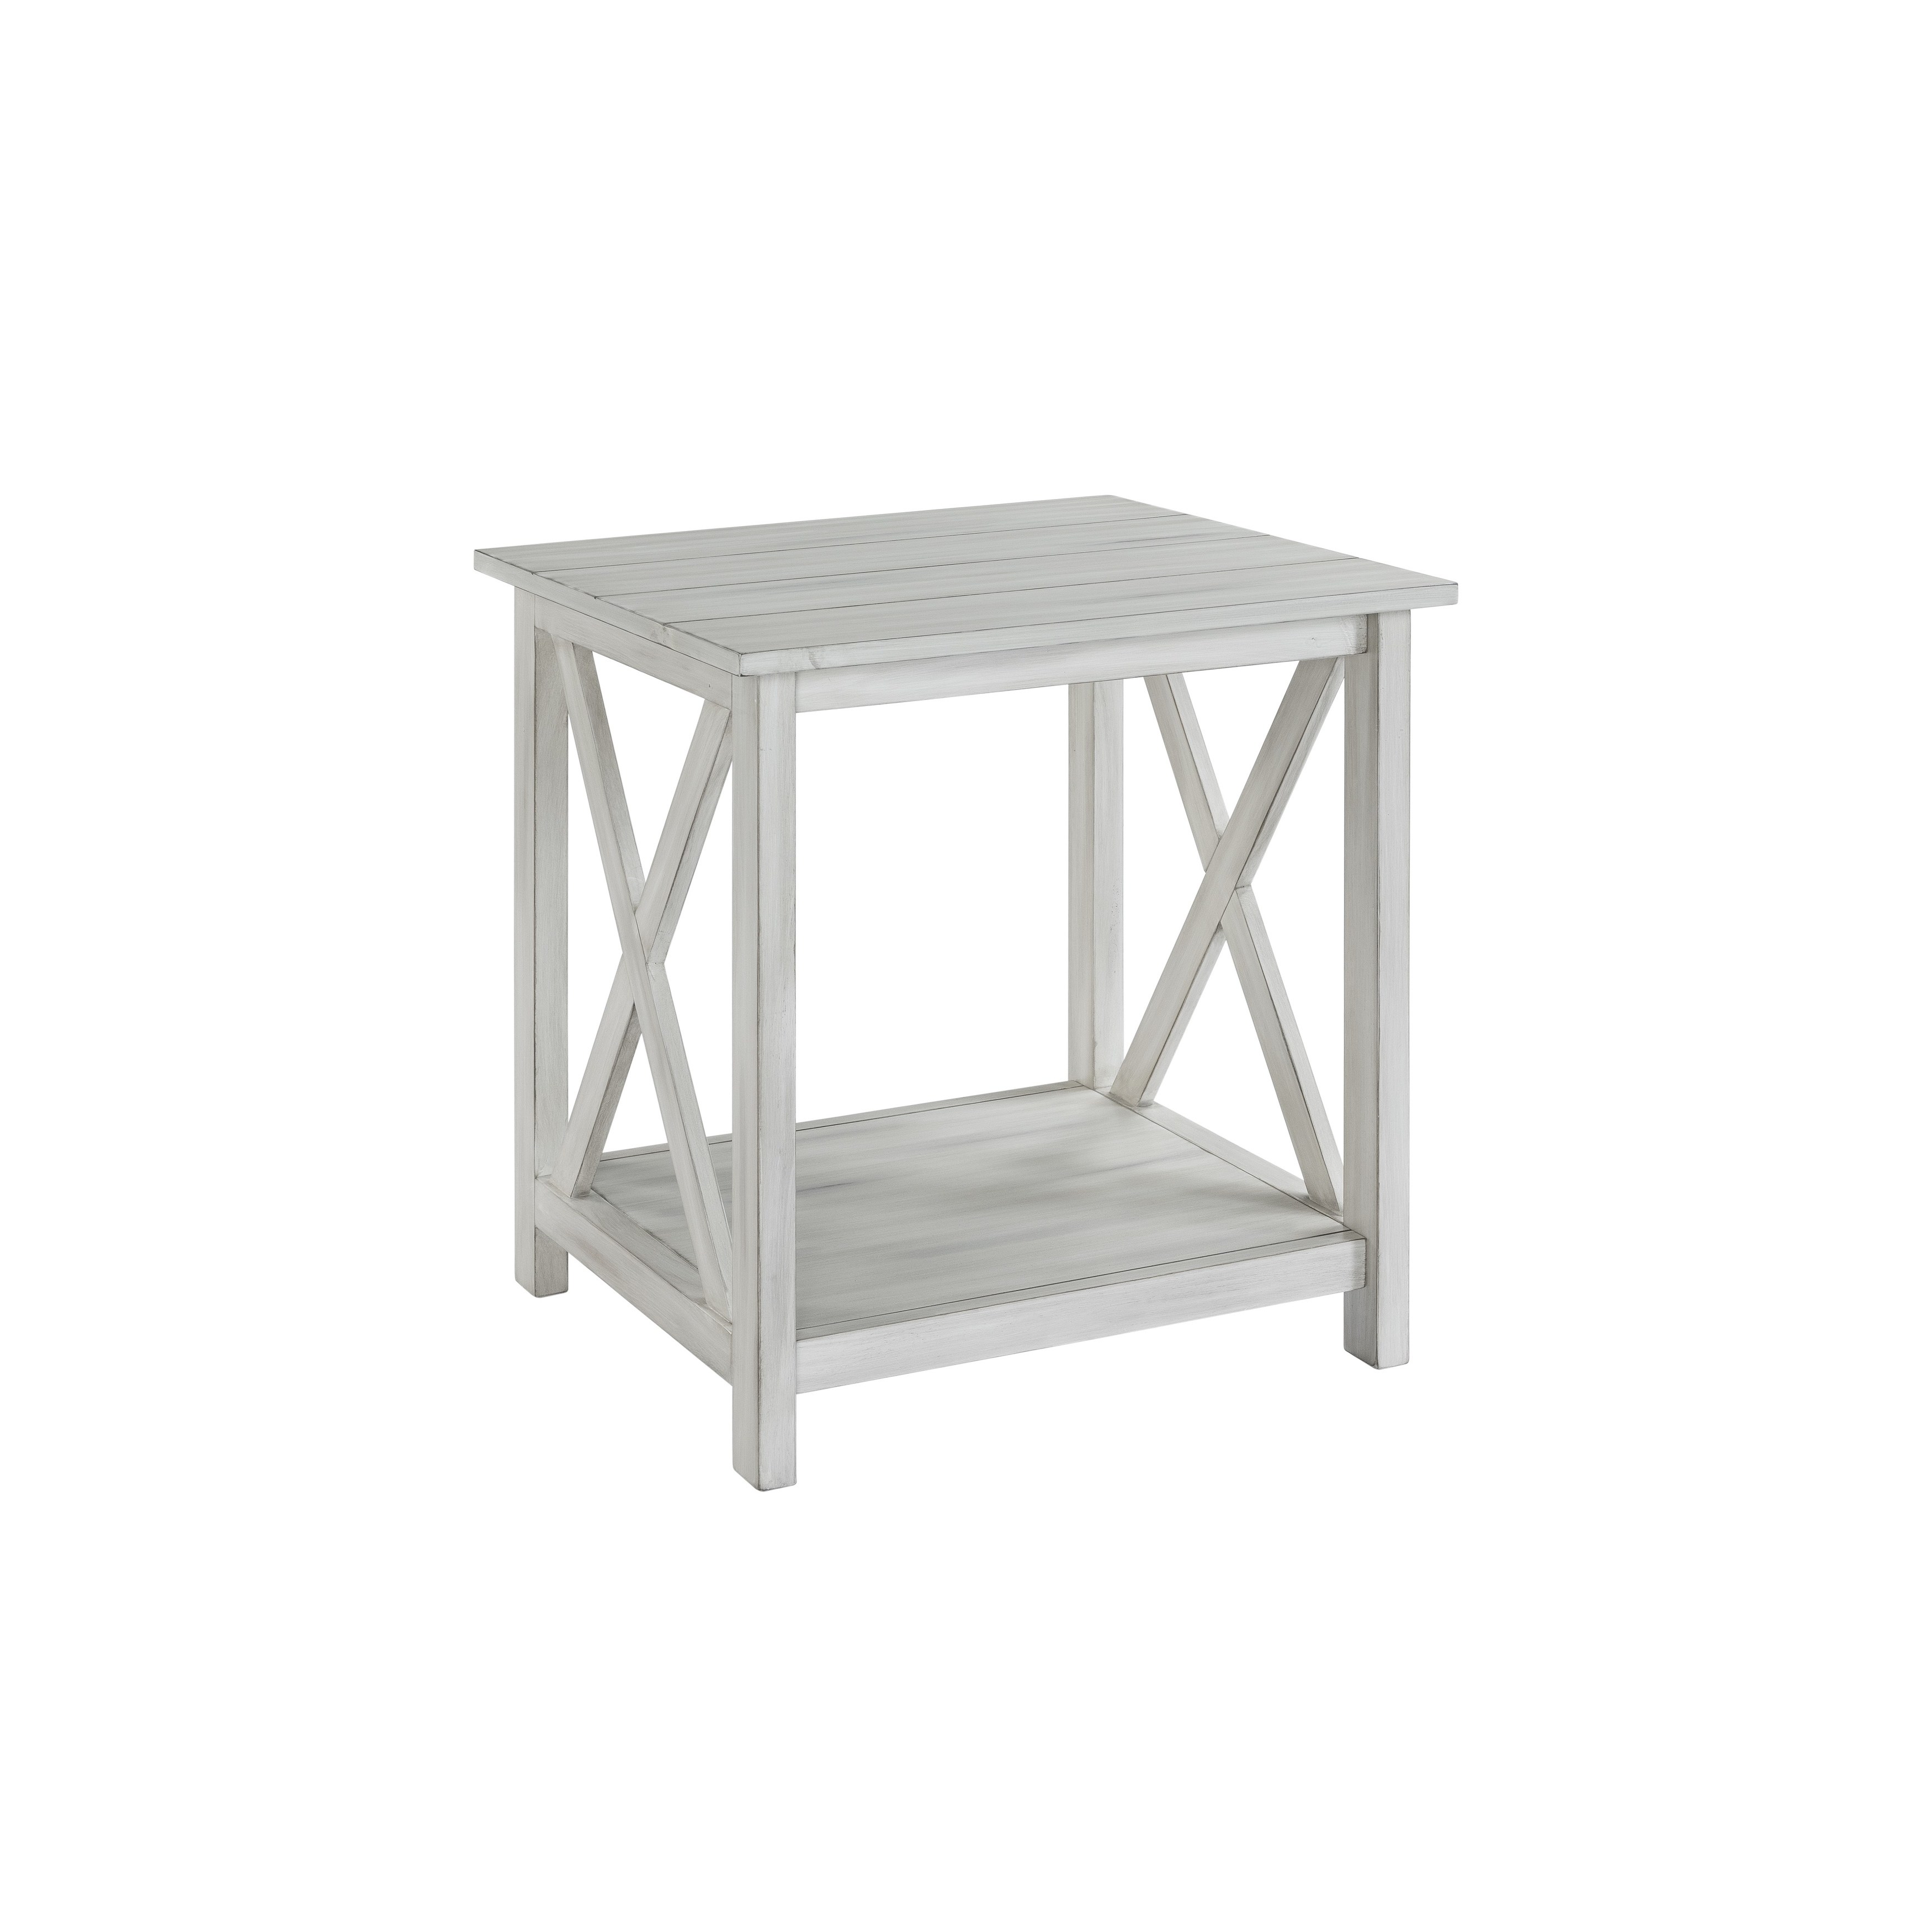 jamestown distressed white wood end table free shipping today grey quatrefoil with mirror accent folding dining set antique rectangular lanterns square fall tablecloth pedestal